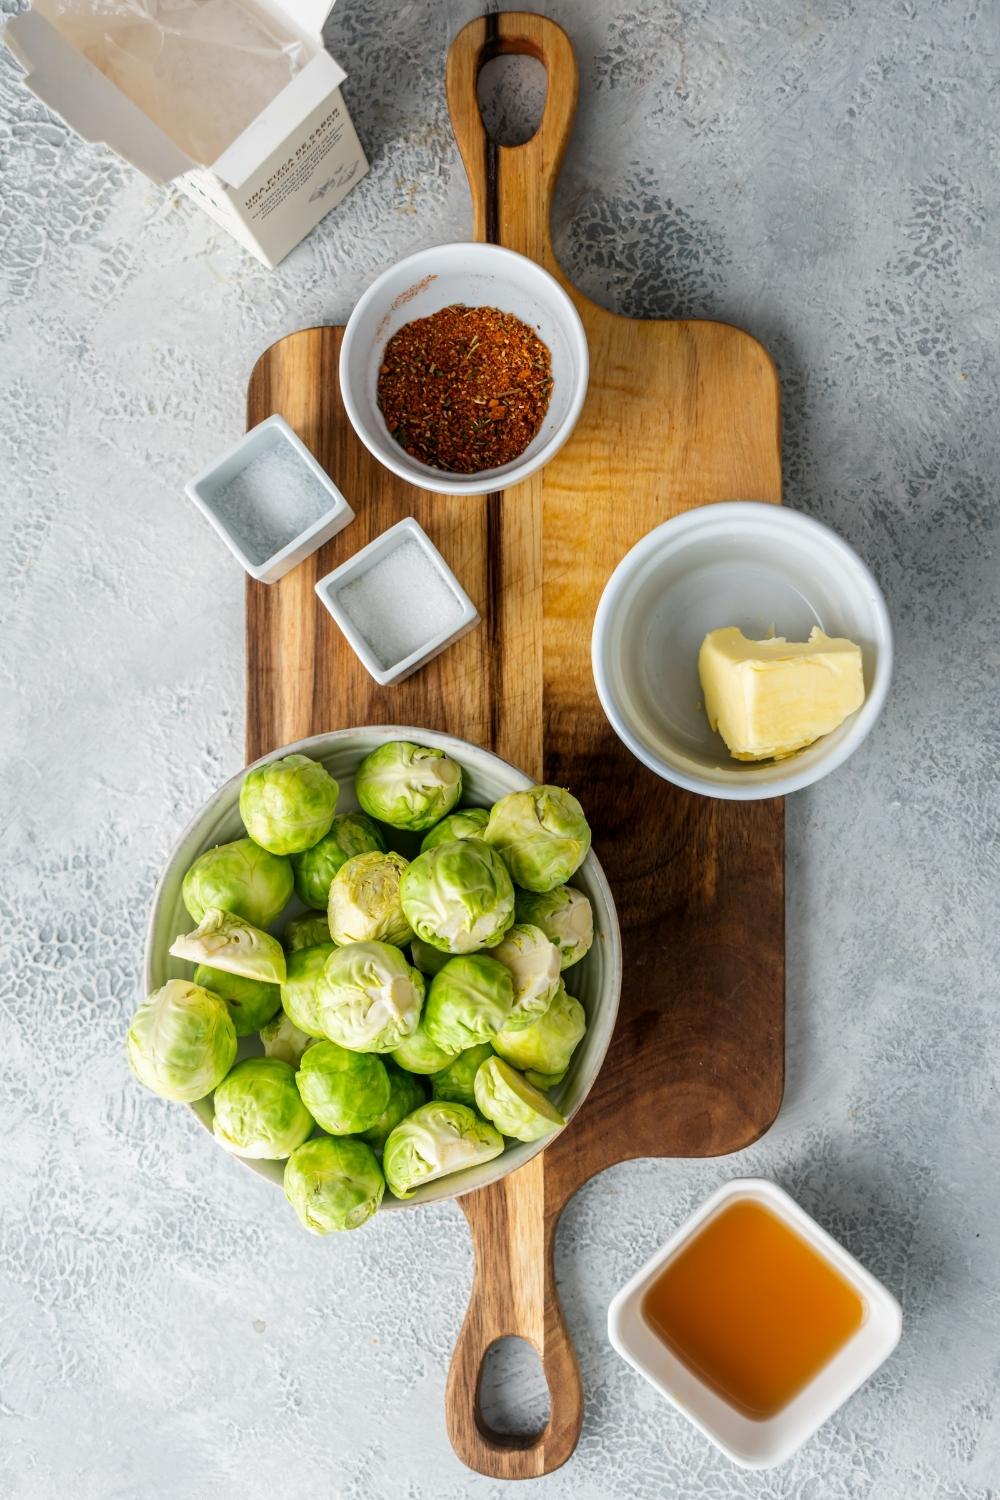 A bowl of brussel sprouts, butter in a bowl, and seasoning in a bowl on a wooden cutting board. In front of it is honey in a bowl.